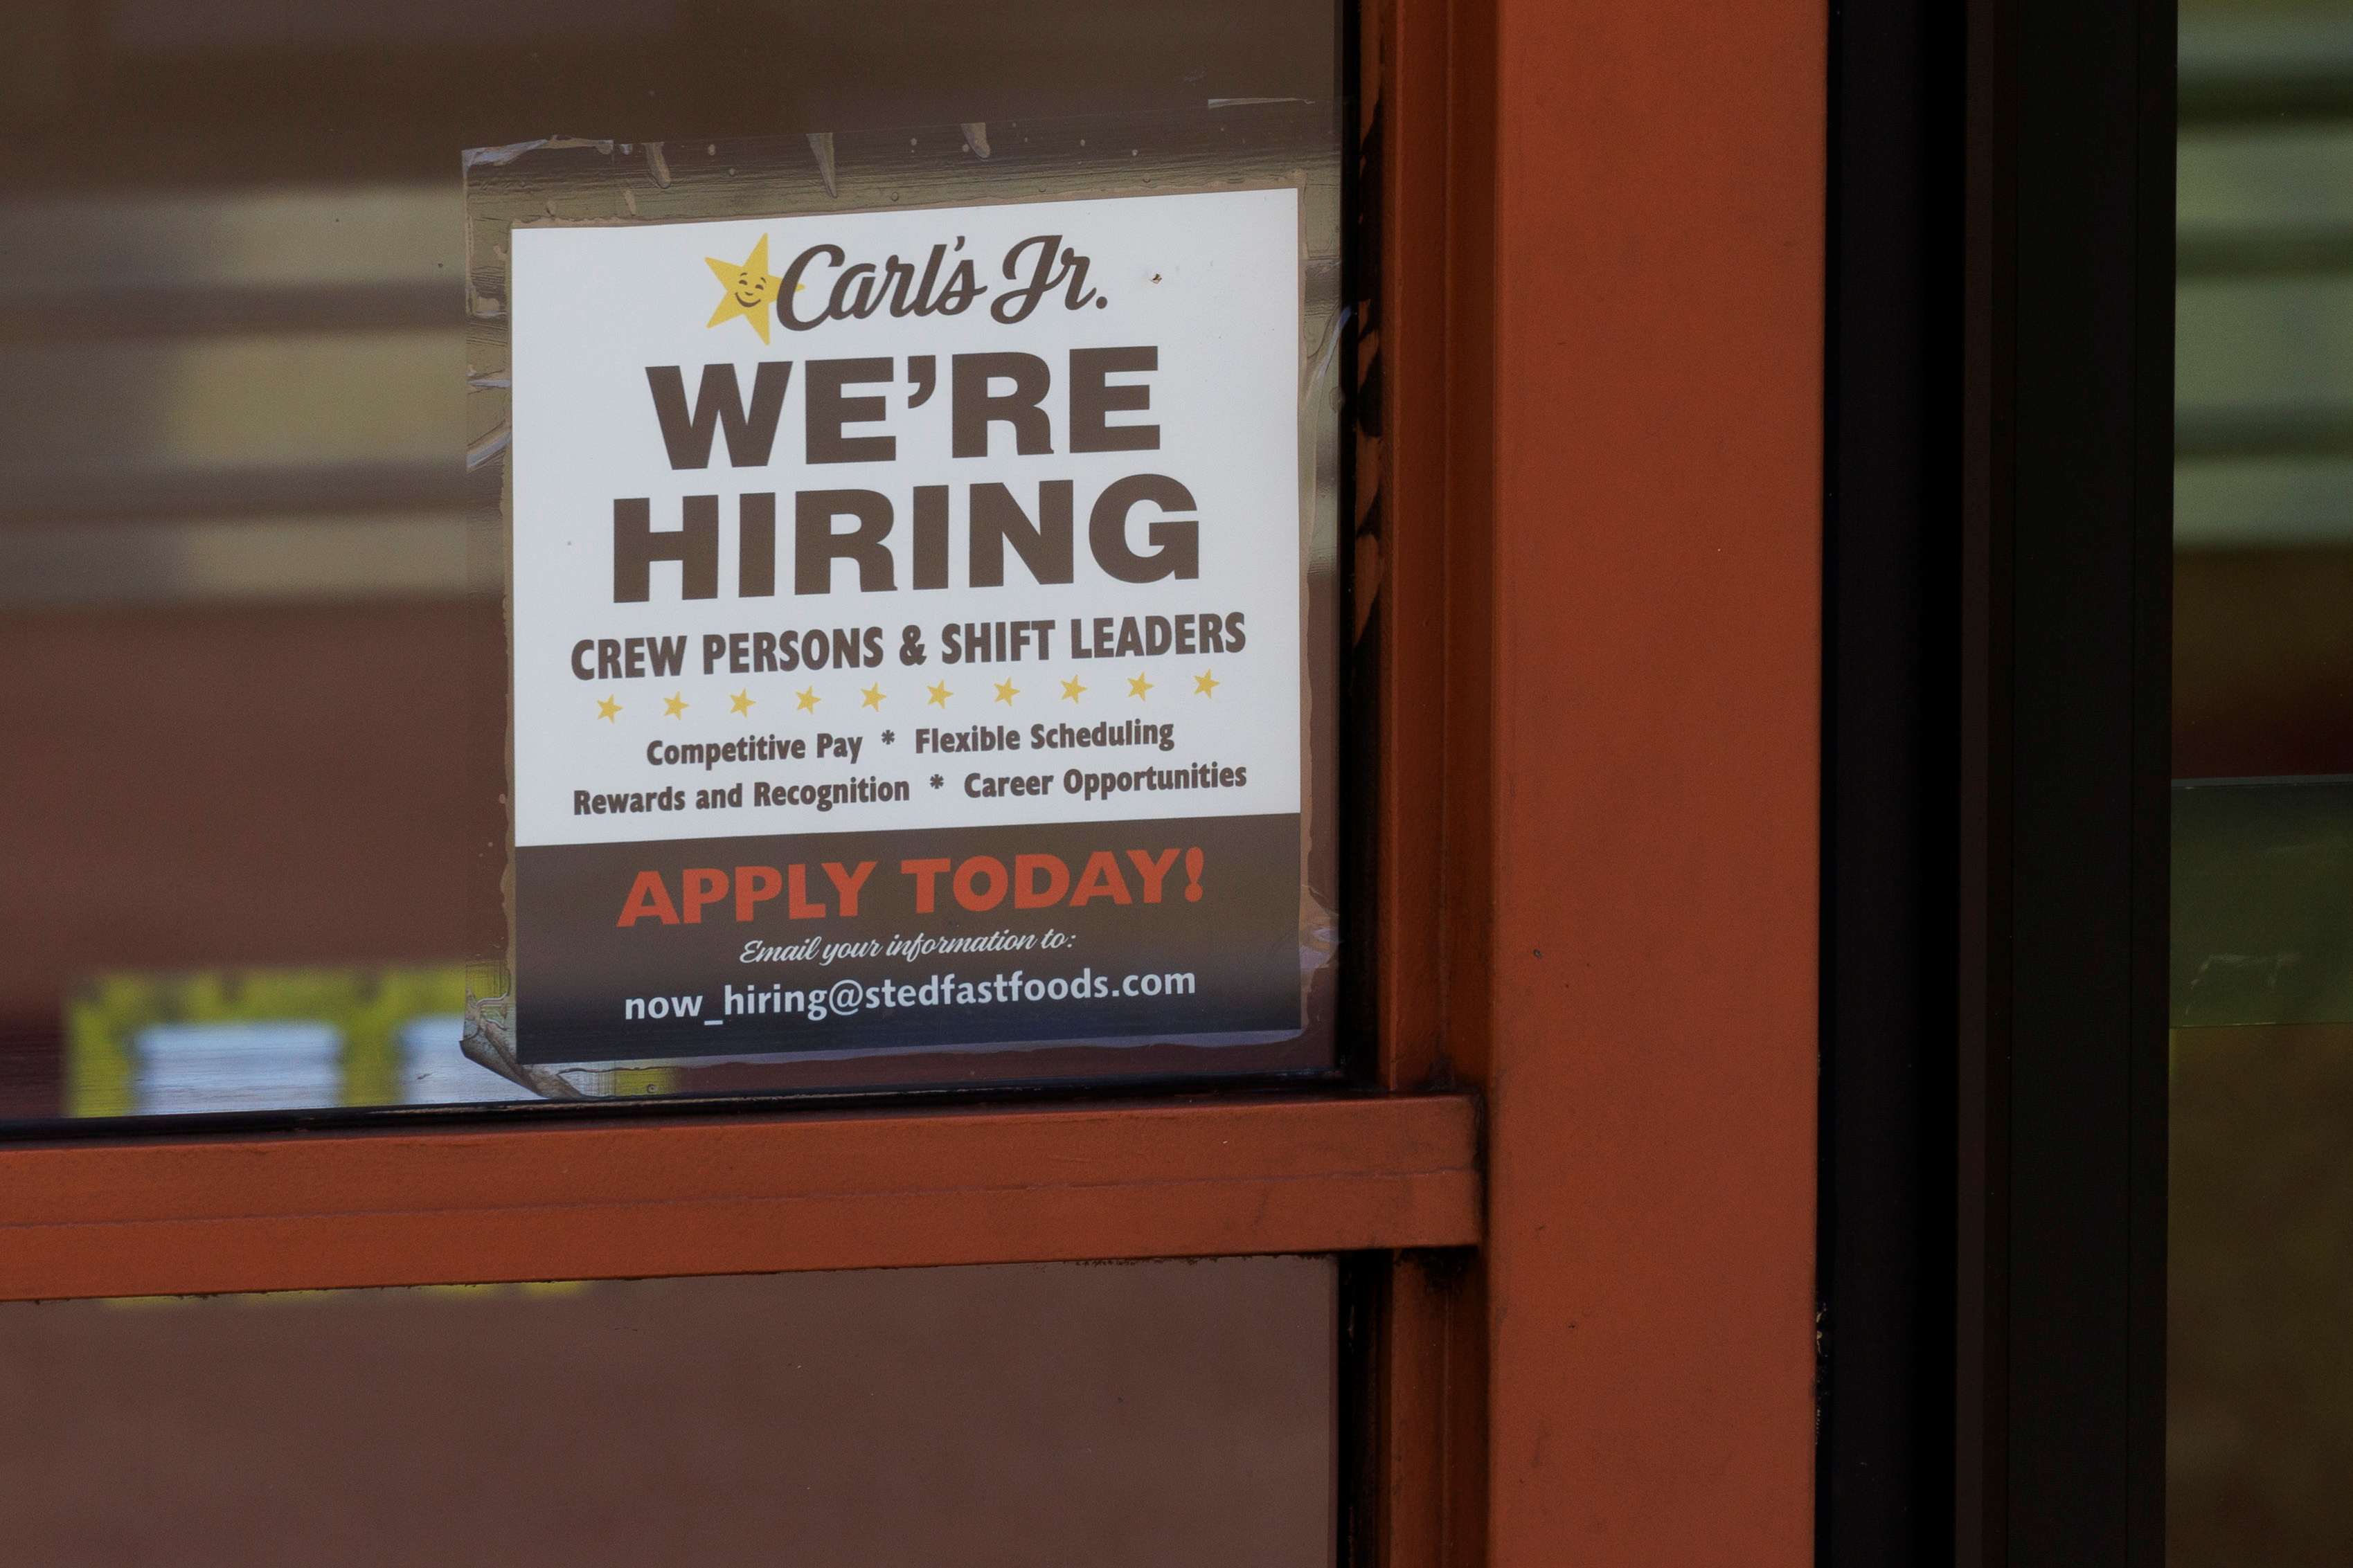 A help wanted sign is shown at a fast food restaurant in Solana Beach, California